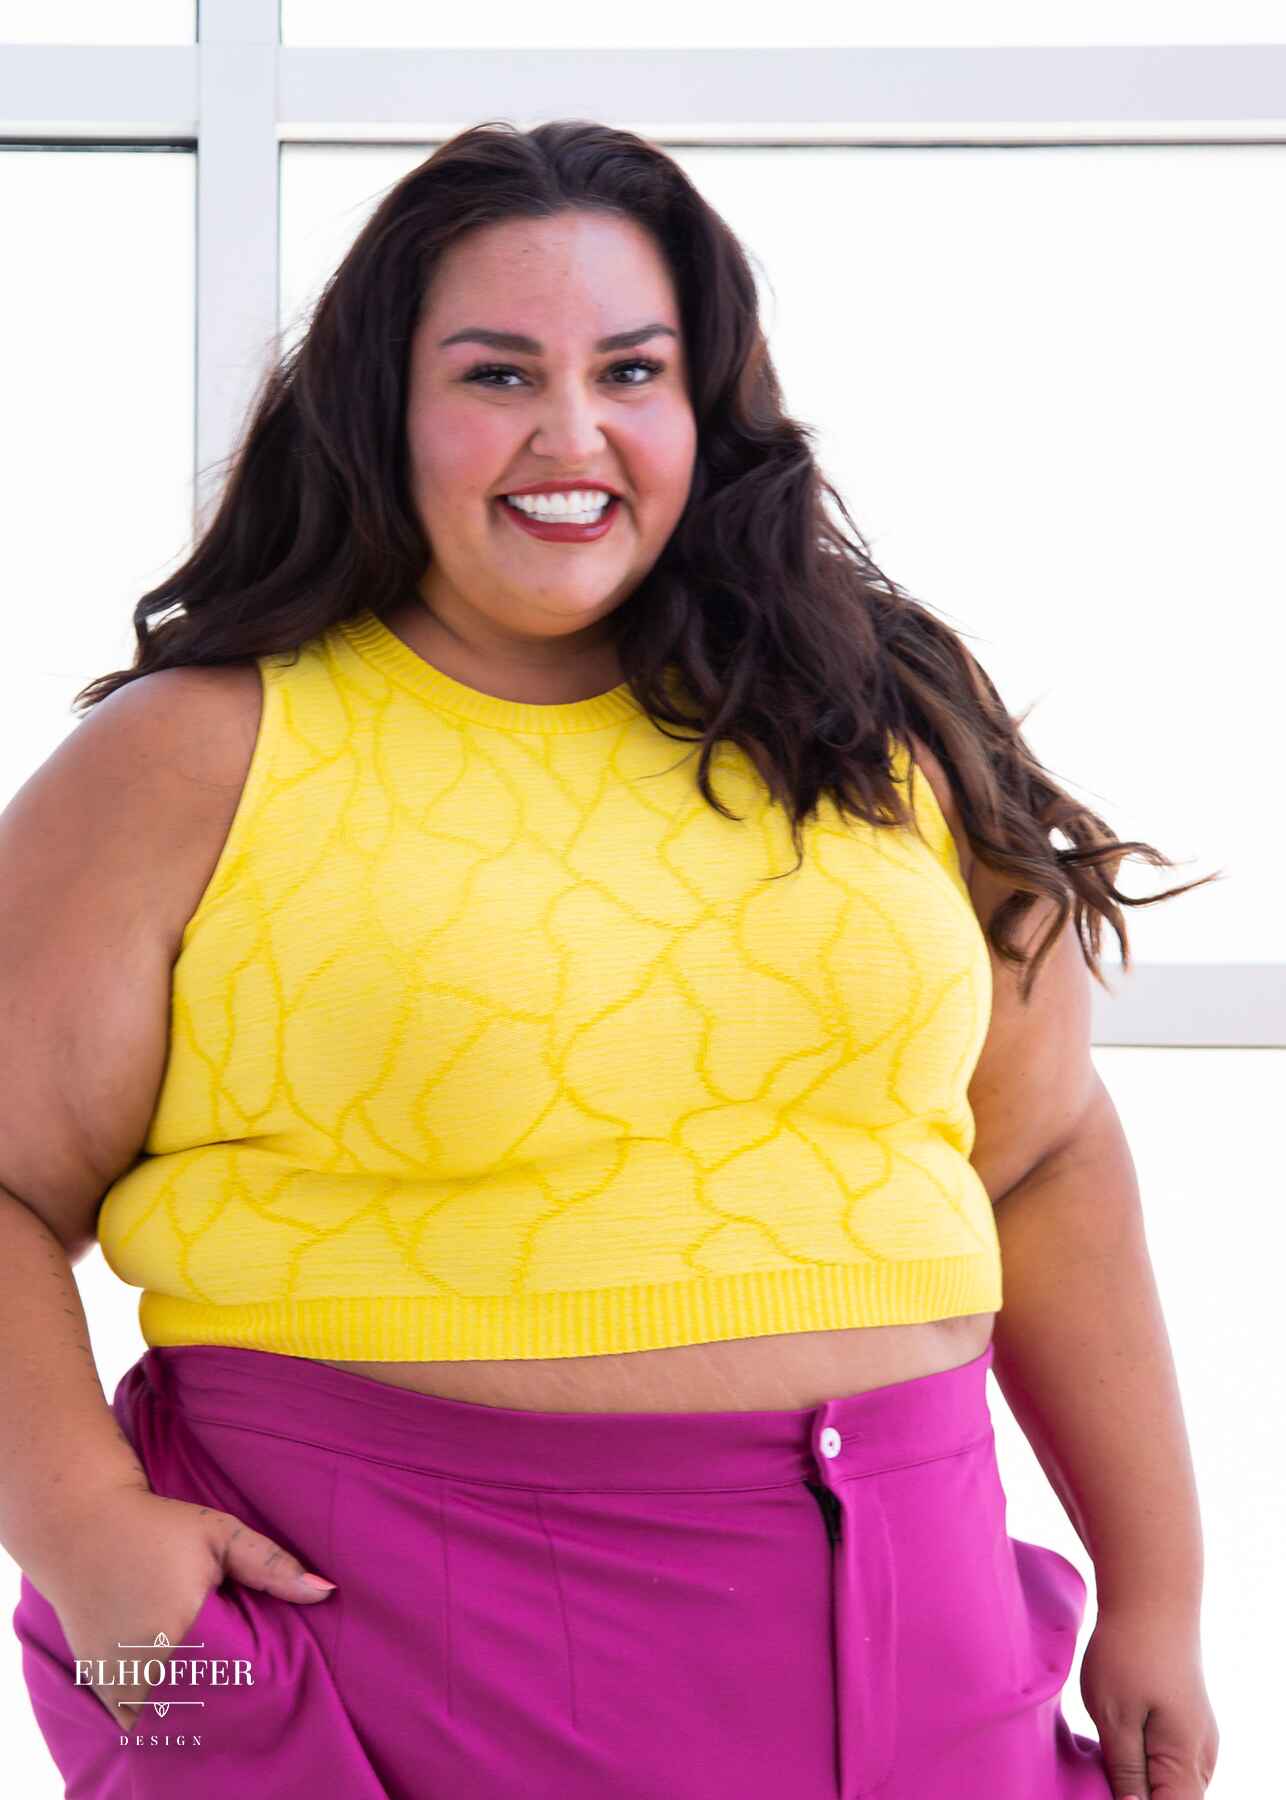 Kristen, an olive skinned 3xl model with long dark brown wavy hair, is smiling while wearing a bright yellow sleeveless knit crop top with a butterfly wing textured pattern.  She paired the crop top with pink trousers.